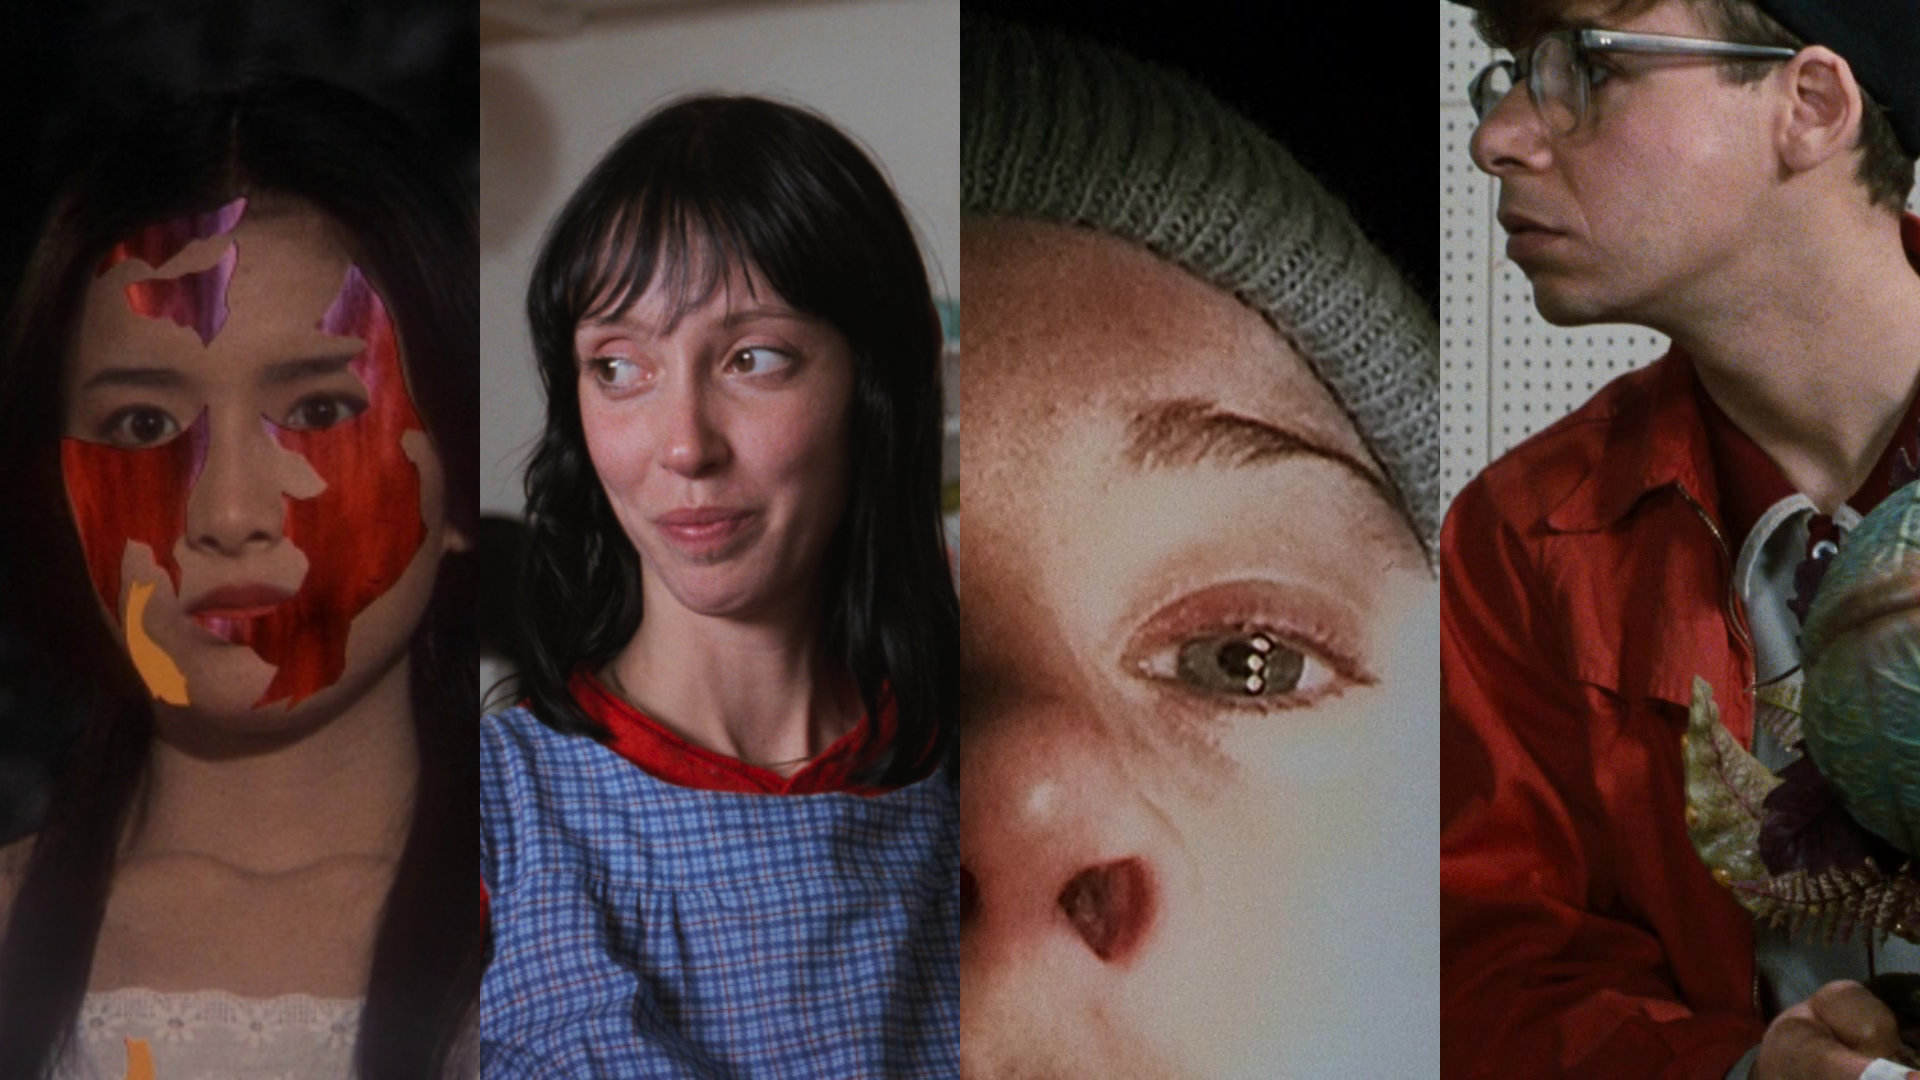 Four screenshots from the movies “House,” “The Shining,” “The Blair Witch Project,” “And Rocky Horror Picture Show”